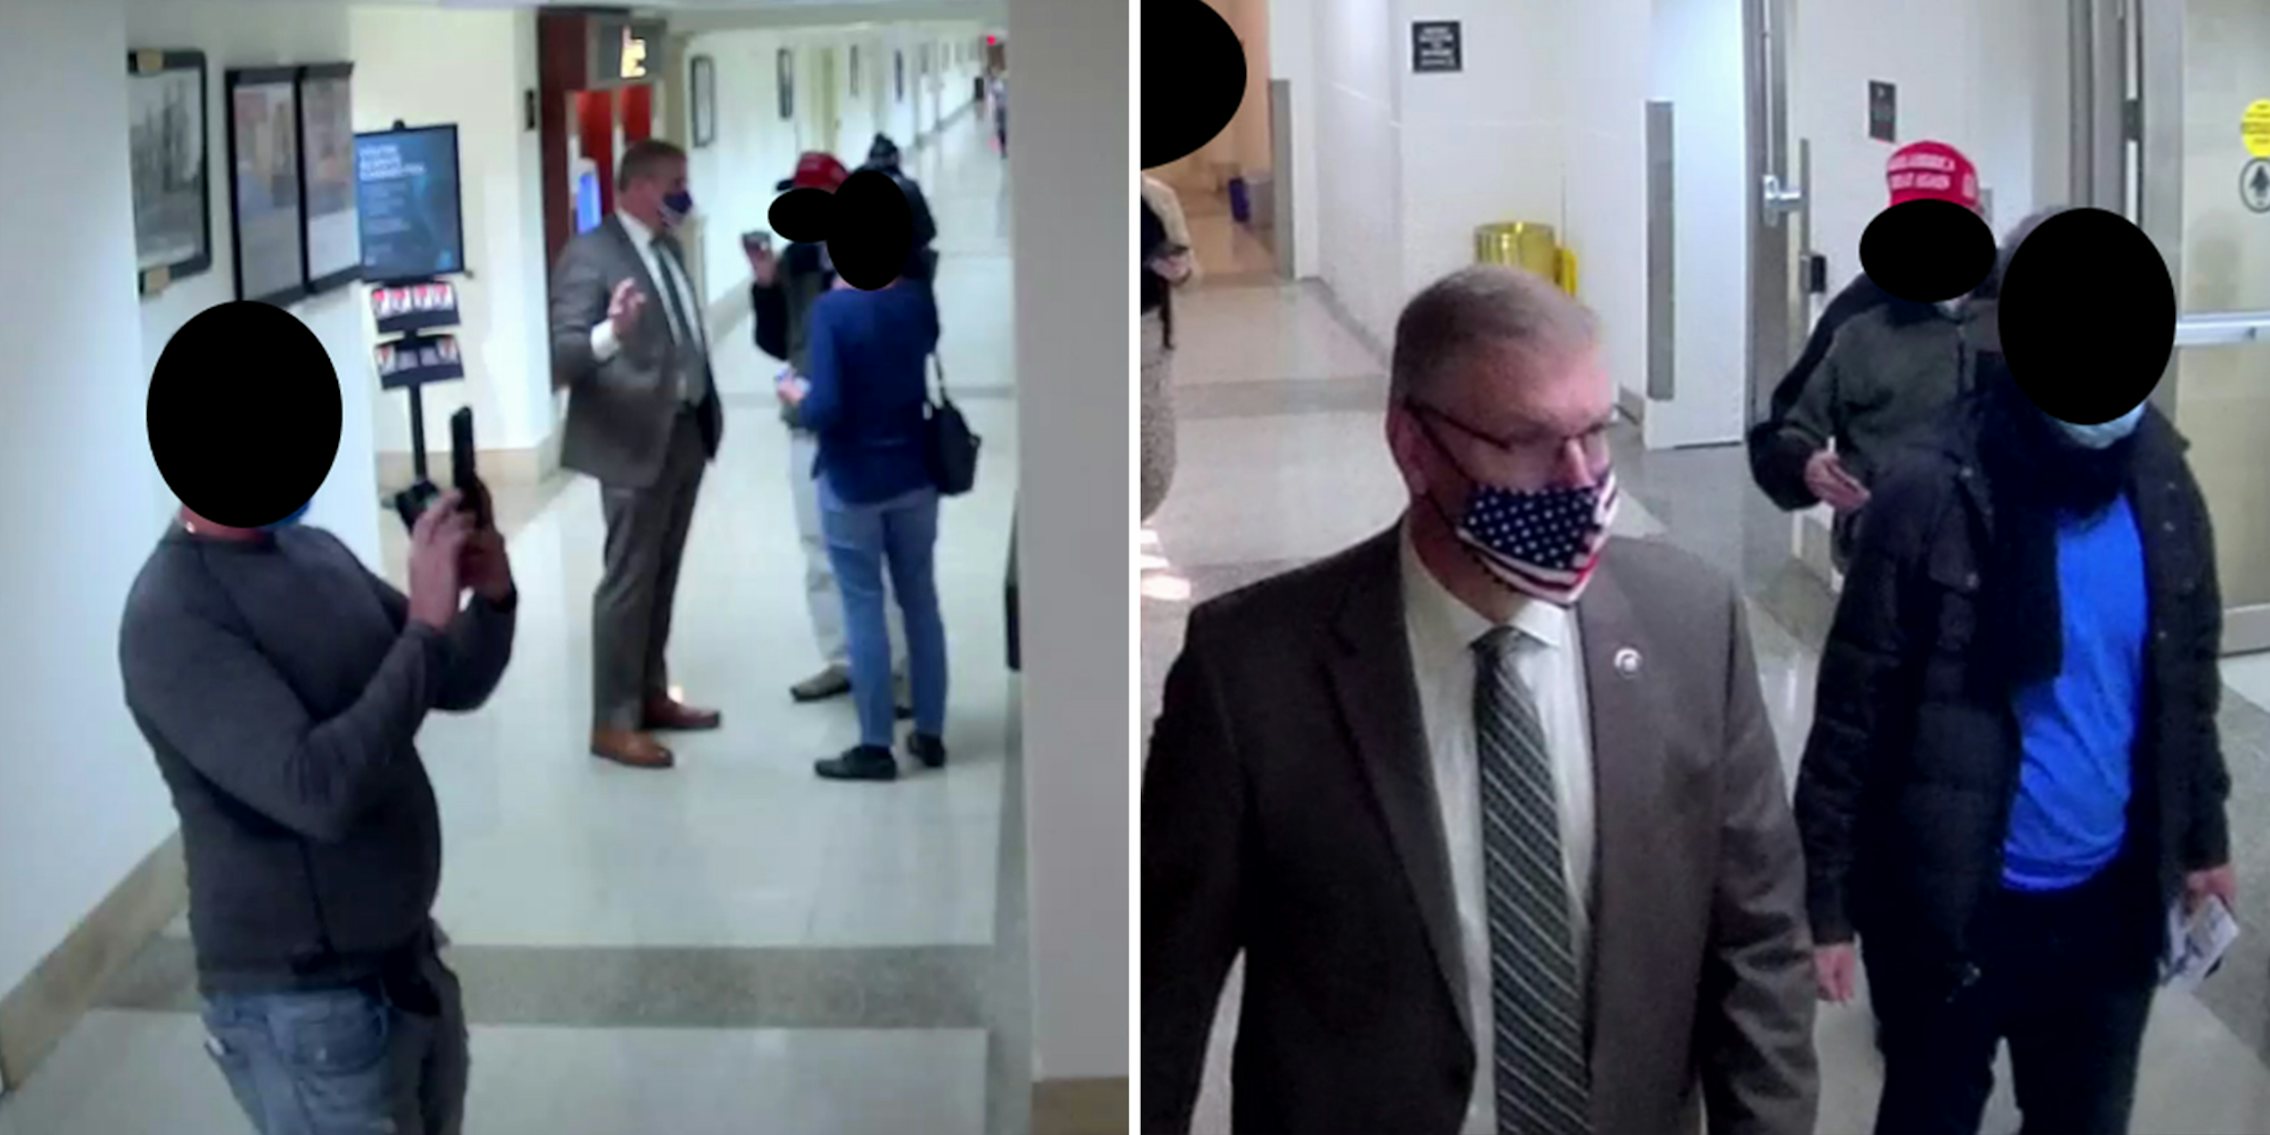 man with black circle over face taking photograph with phone while people speak nearby (l) Rep. Barry Loudermilk with American flag mask near people with black circles over faces and MAGA hat (r)